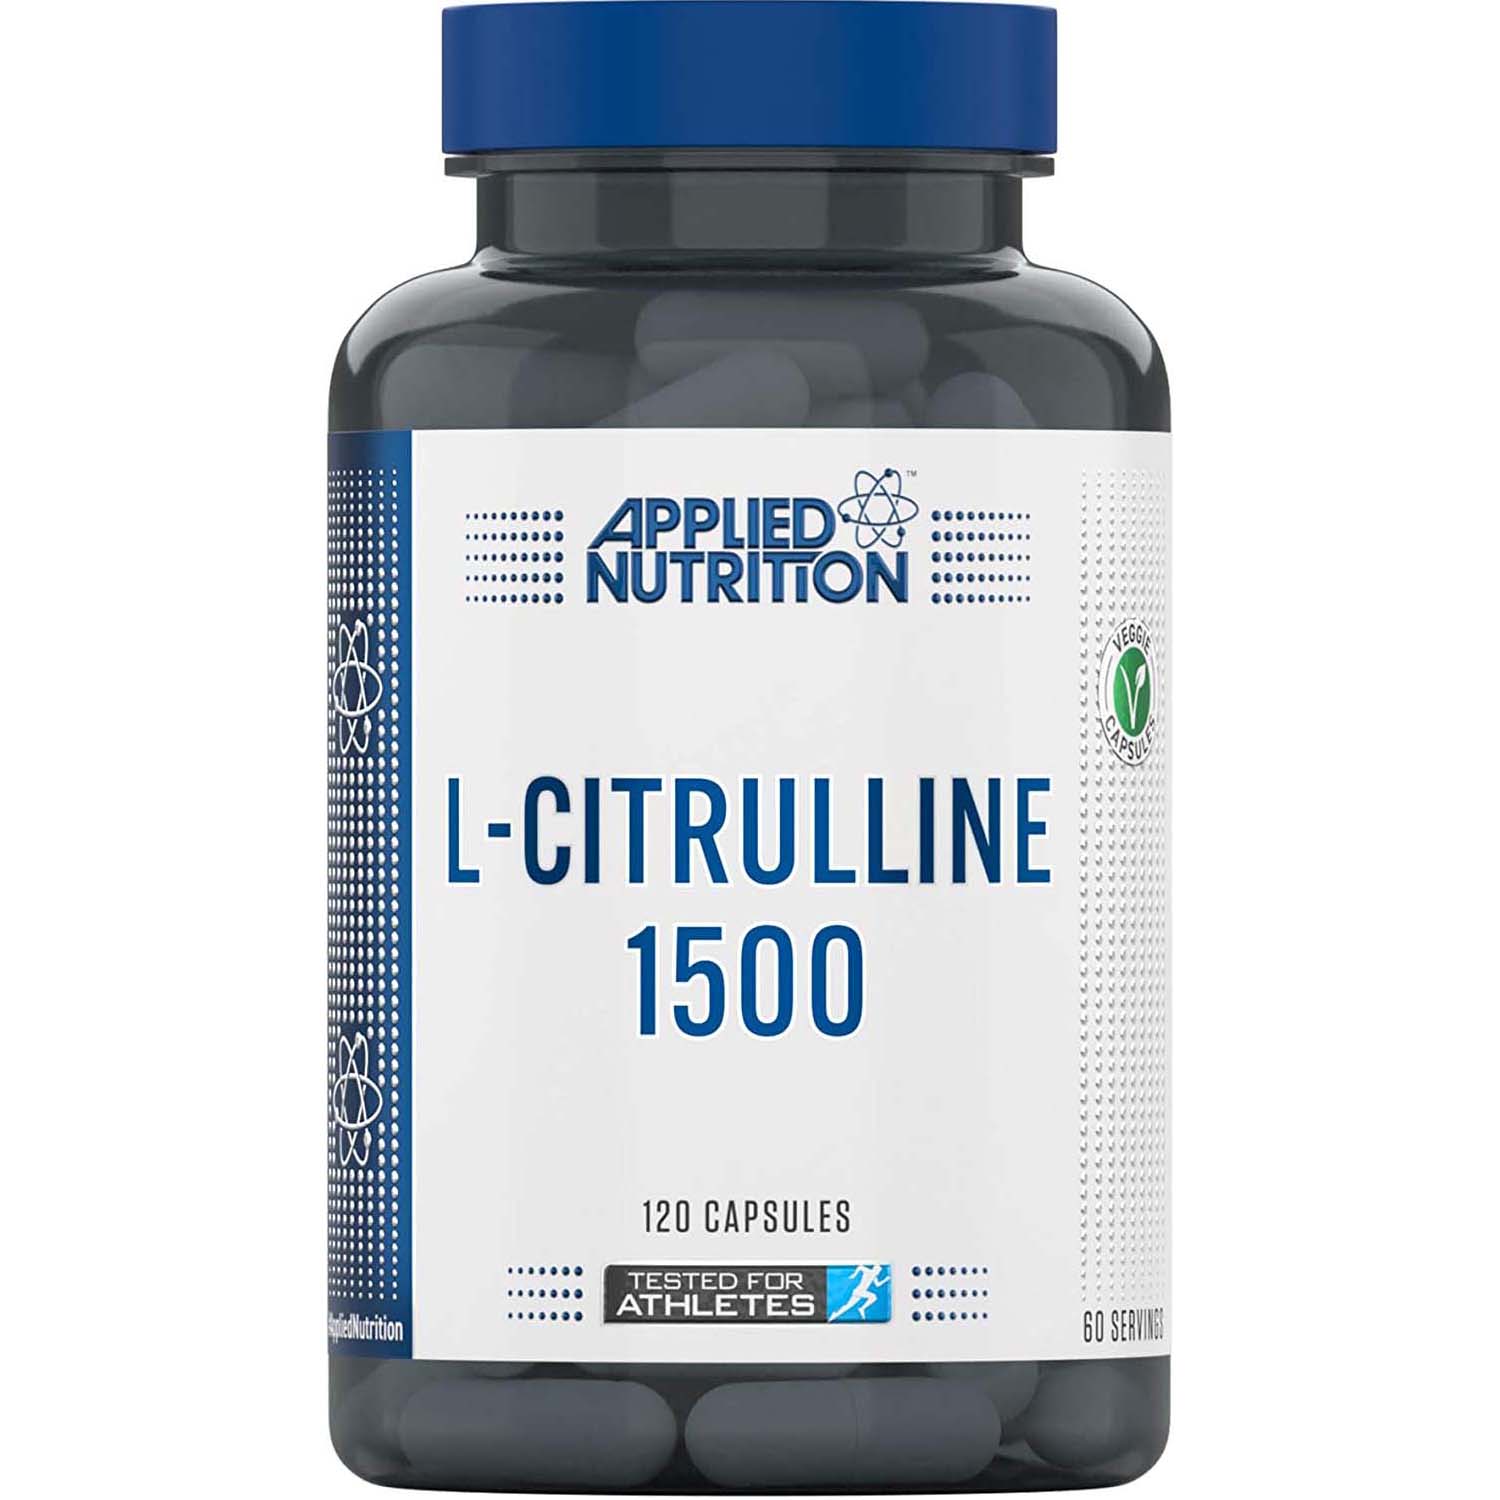 Applied Nutrition L Citrulline 120 Capsules 1500 mg